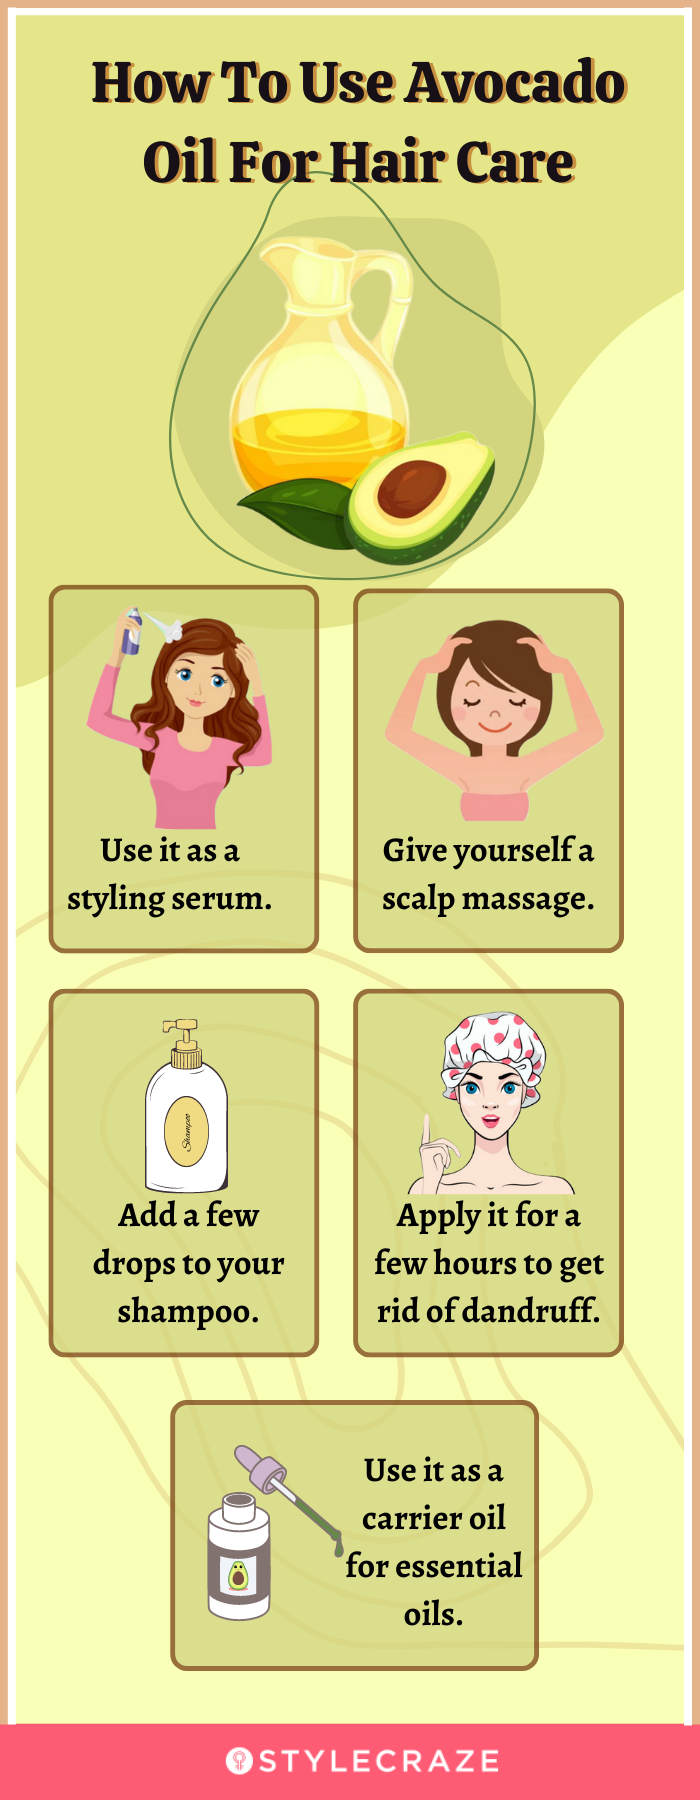 how to use avocado oil for hair care (infographic)